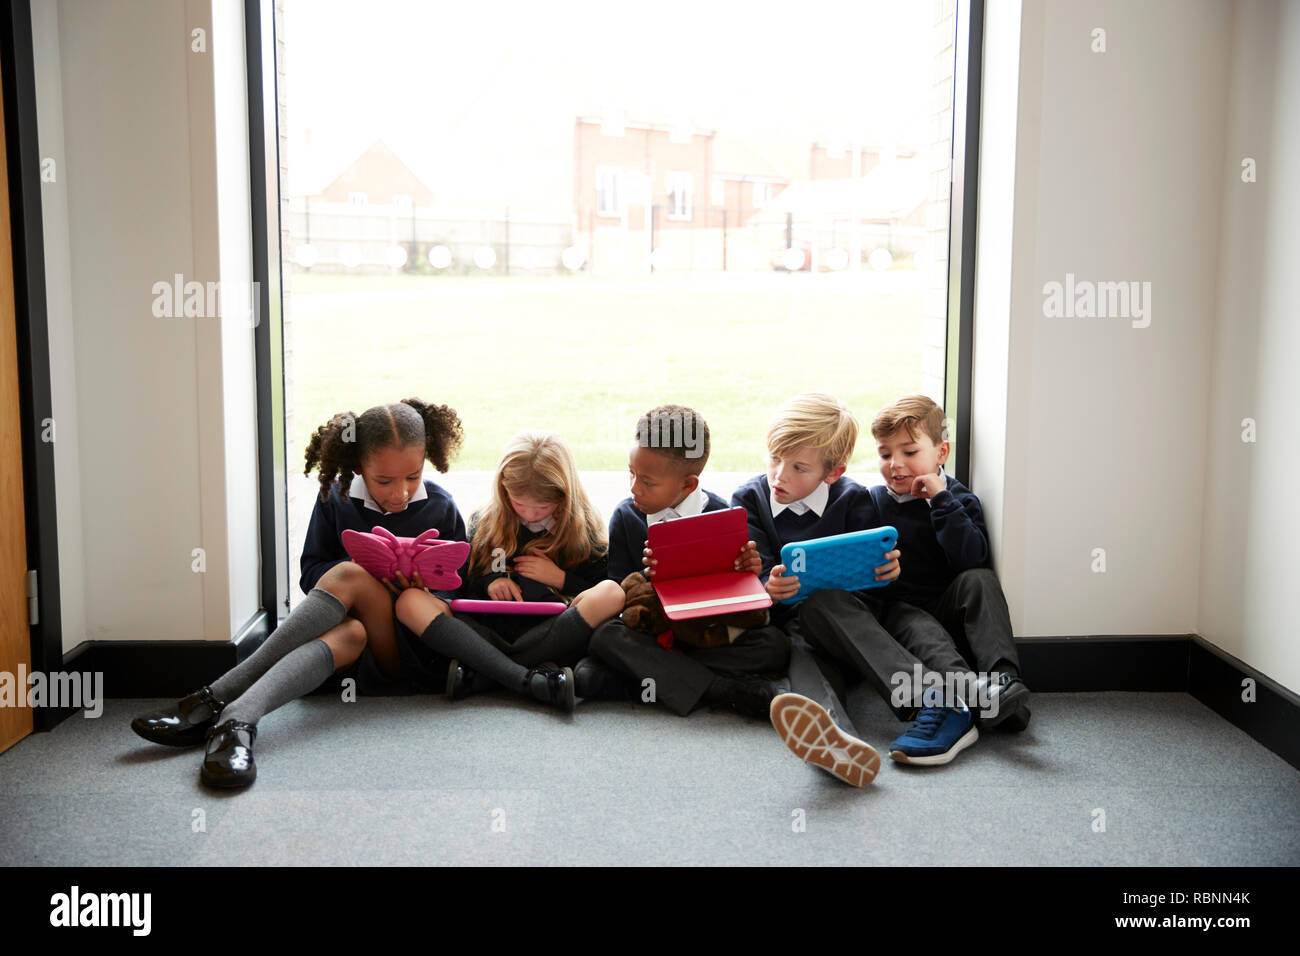 Five primary school kids sitting in a row on the floor in front of a window in a school corridor looking at tablet computers, front view, close up Stock Photo